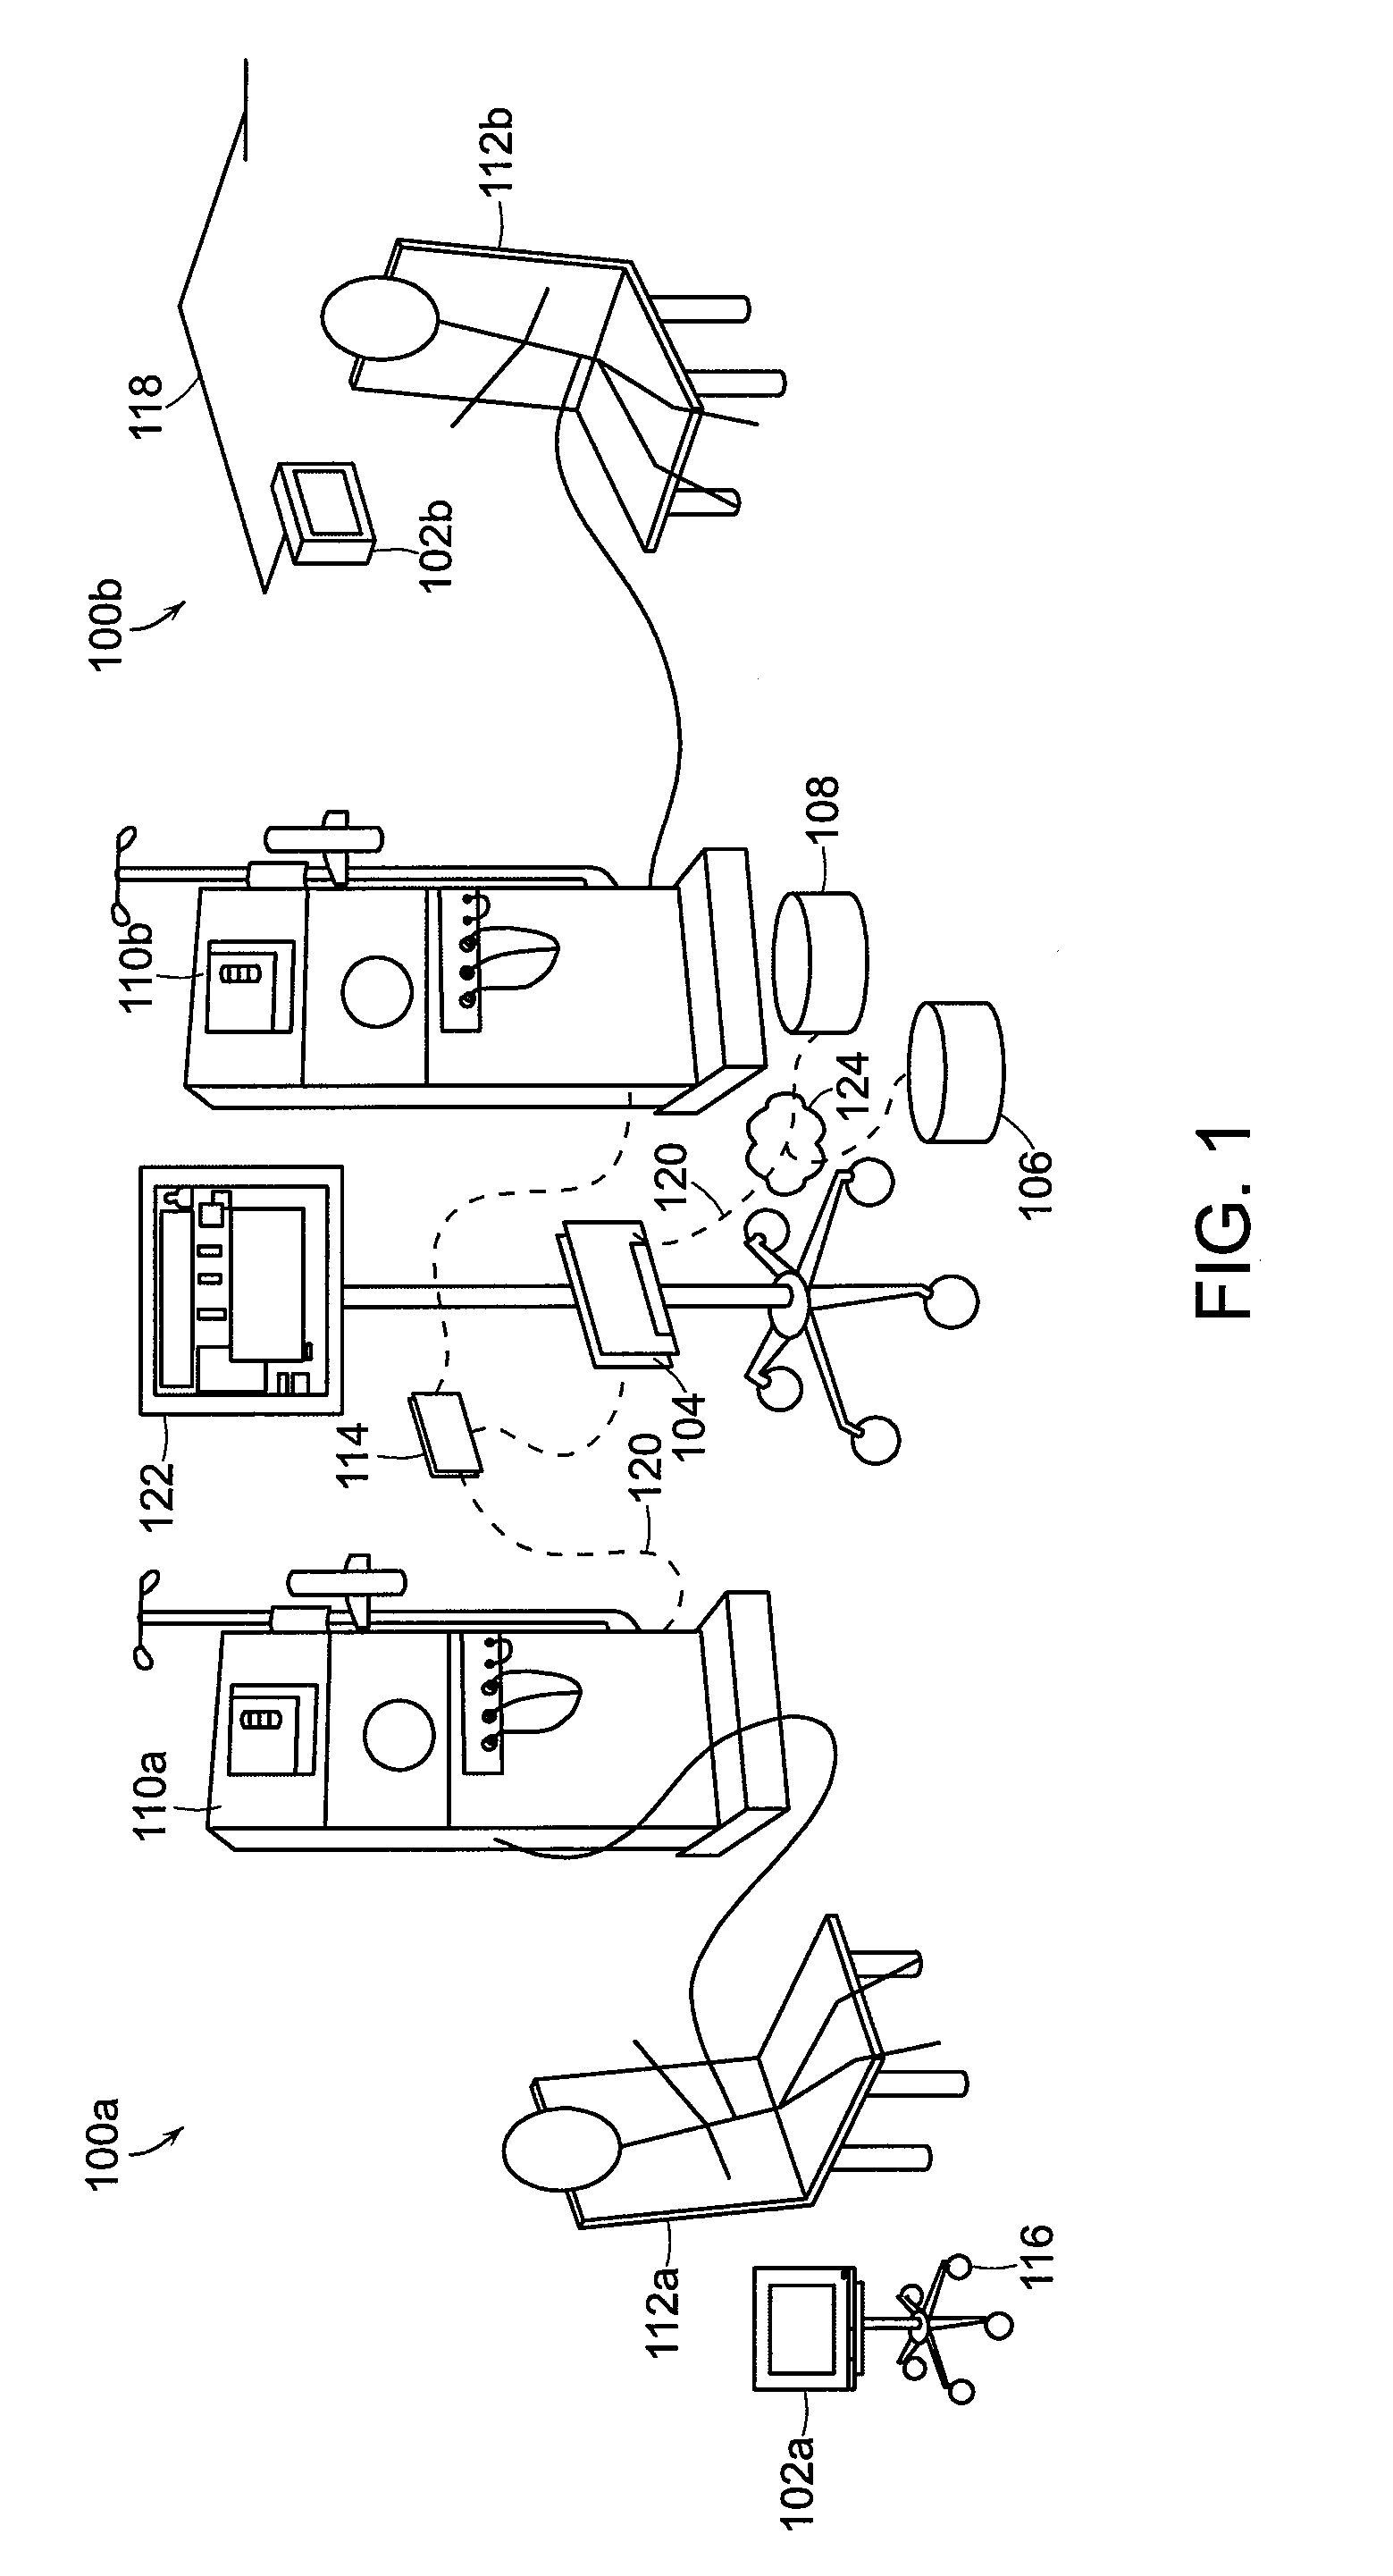 Patient-specific content delivery methods and systems